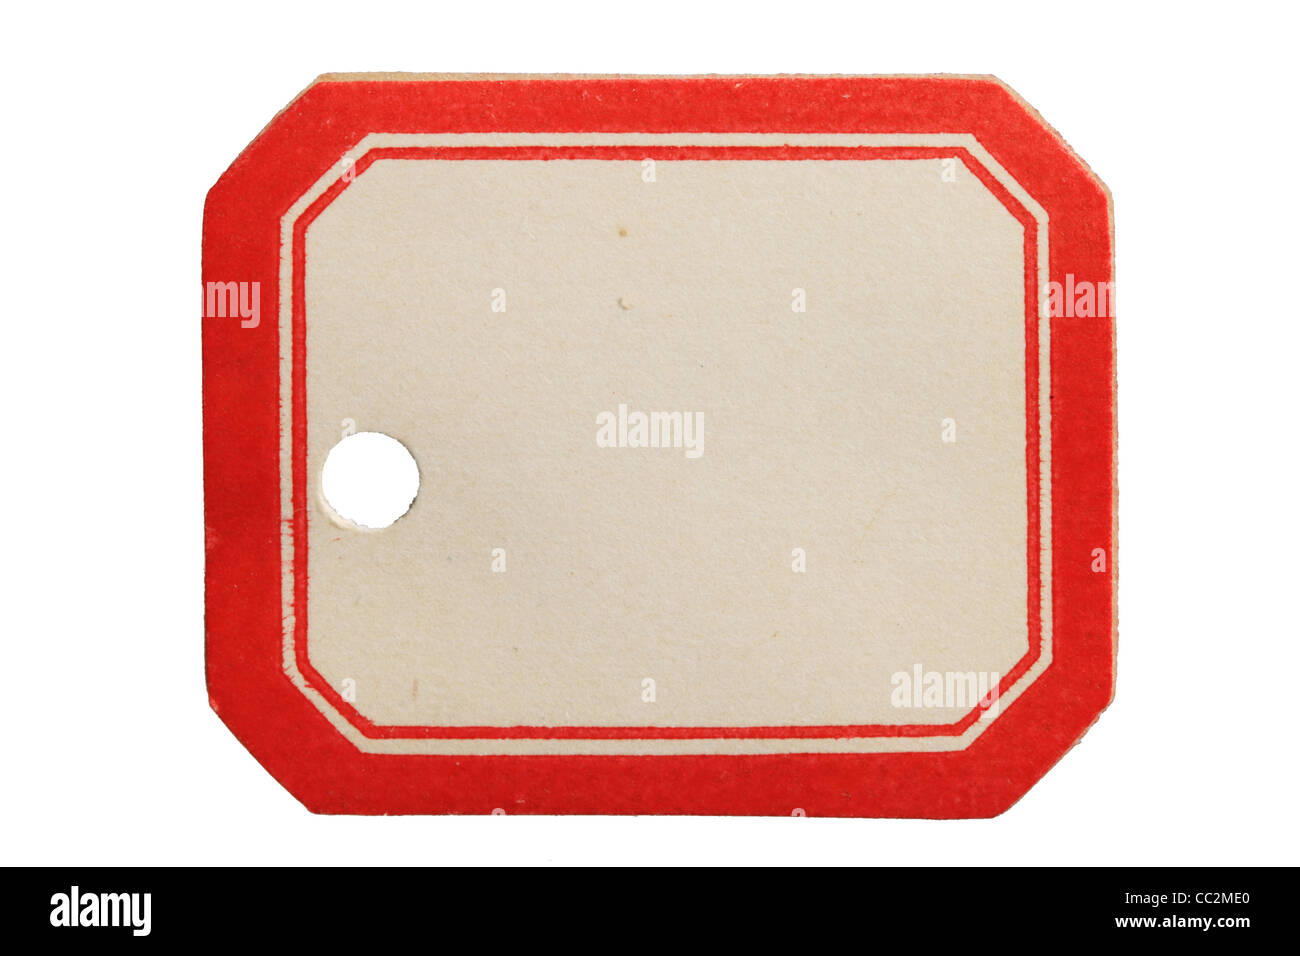 Vintage red and white label tag isolated on white background Stock Photo